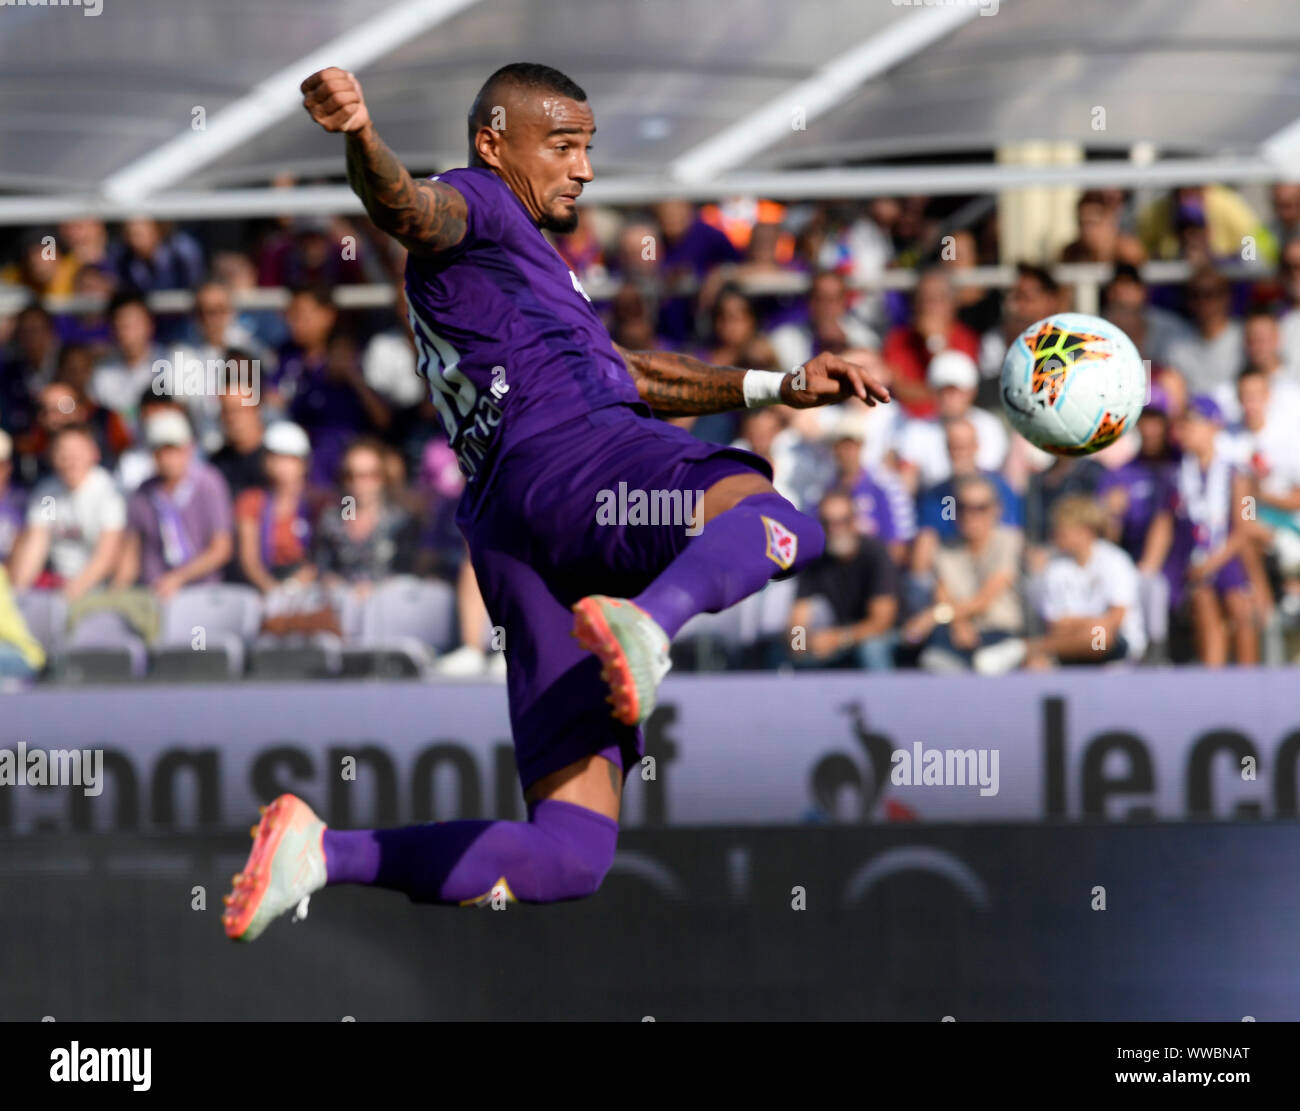 Florence, Italy. 14th Sep, 2019. Kevin-Prince Boateng of Fiorentina competes during the Serie A soccer match between Fiorentina and Juventus in Florence, Italy, Sept. 14, 2019. Credit: Alberto Lingria/Xinhua Credit: Xinhua/Alamy Live News Stock Photo